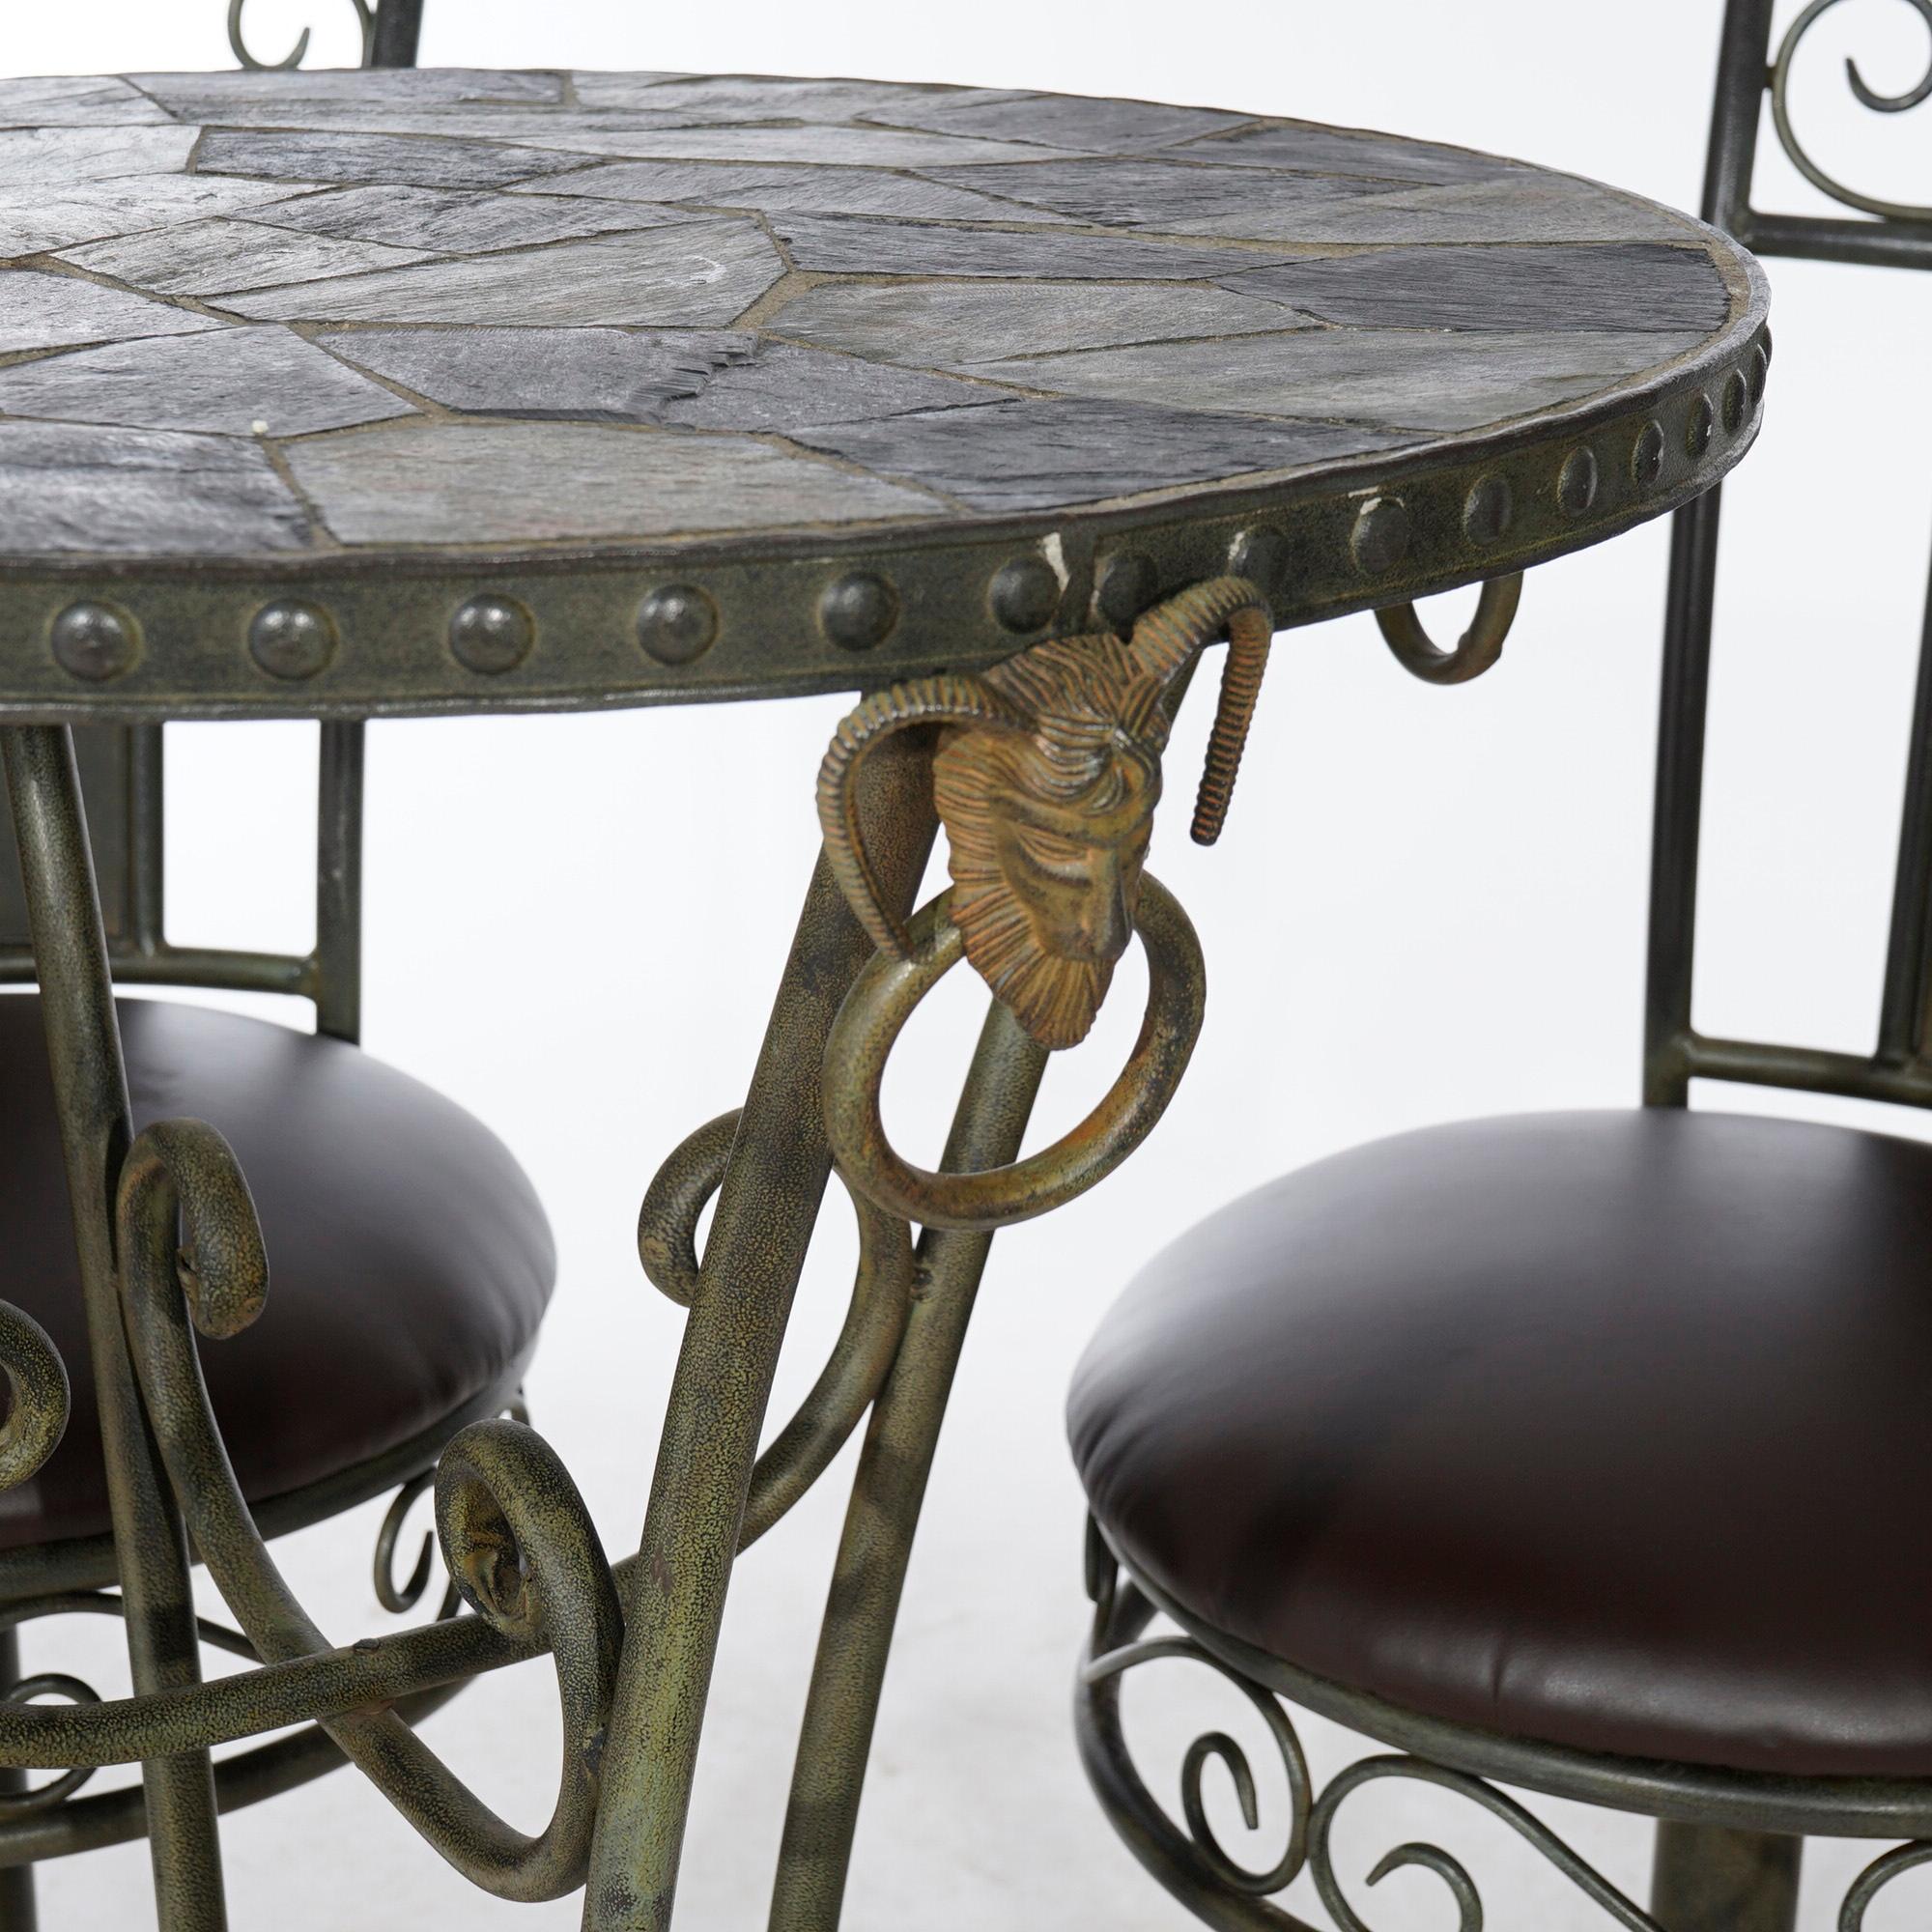 Figural Wrought Iron & Slate Pub Table & Chairs with Satyr Heads & Hoof Feet 9